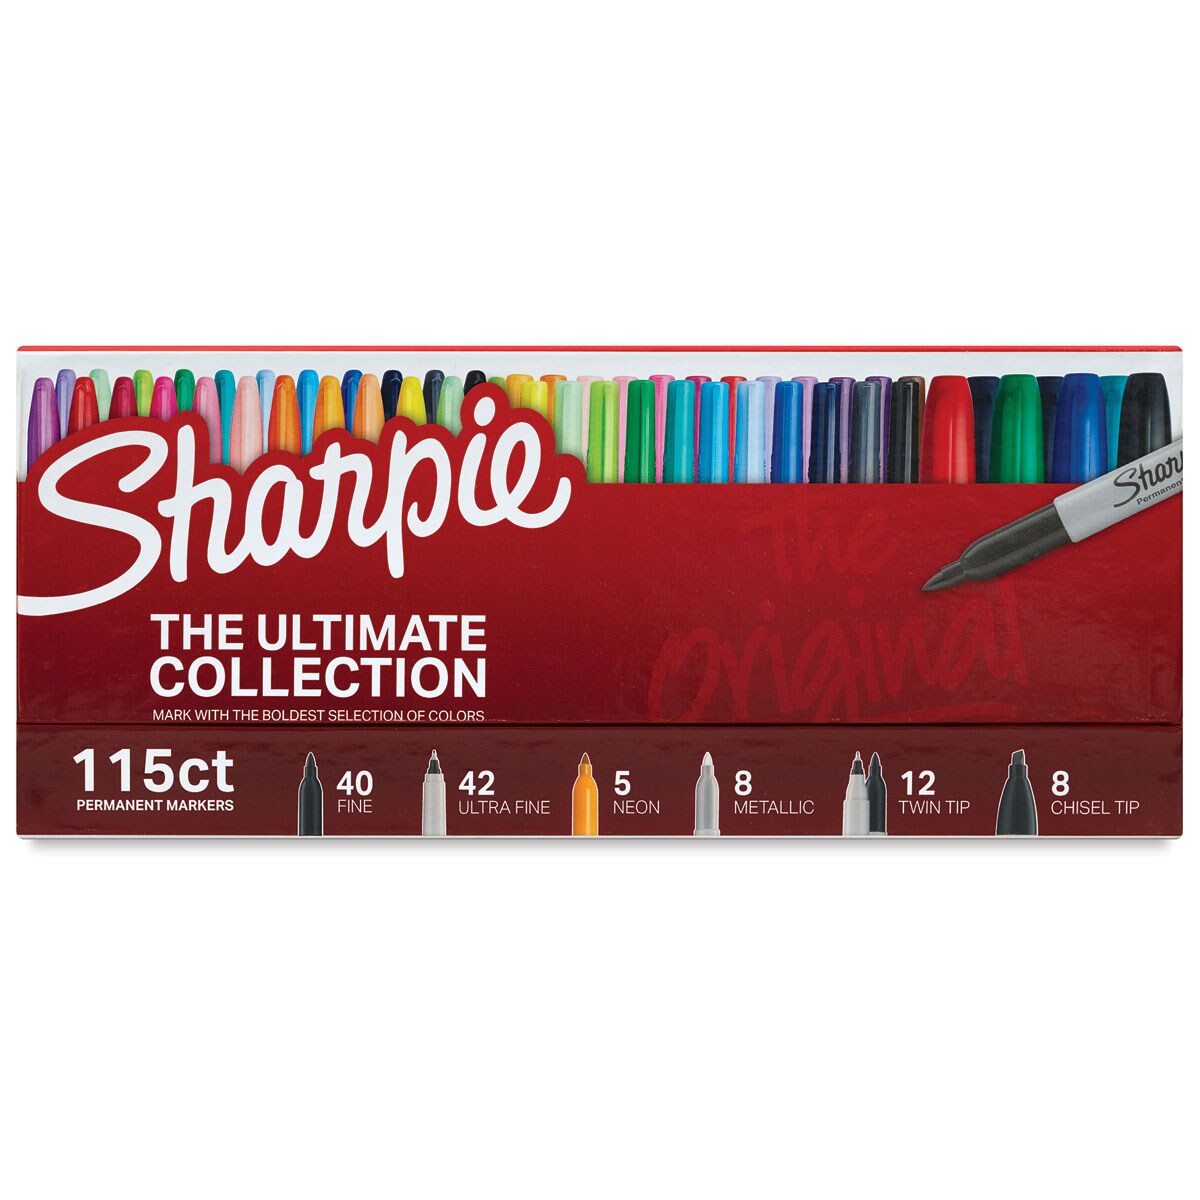 Neon Sharpie Markers for Your Adult Coloring Book Pages